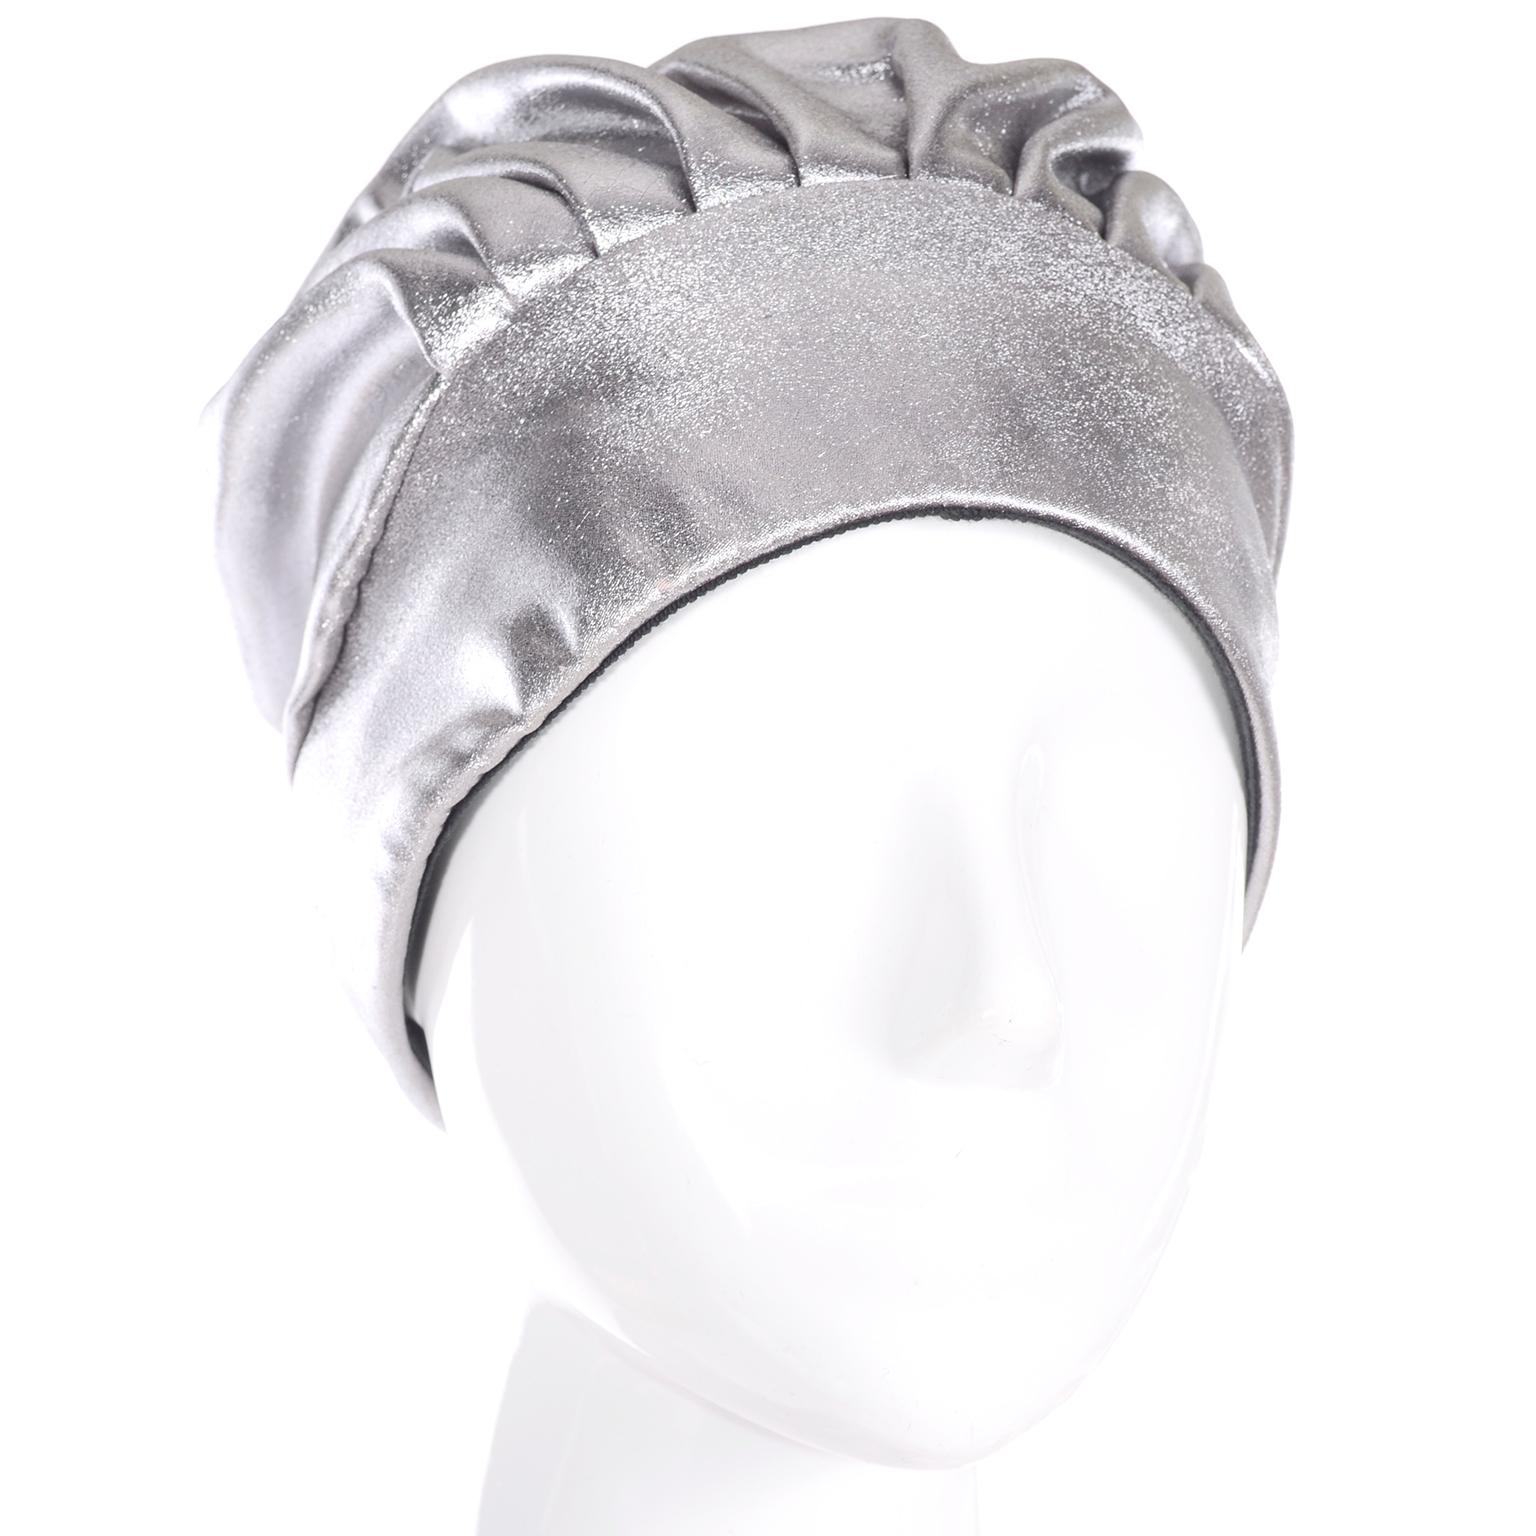 This is a fabulous silver metallic hat with a bonnet or turban style. It is pleated in front and back, with a tie in the very back that hangs down. It is lined in black fabric. The hat has the Nicholas Ungar label from Portland, Oregon. Nicholas